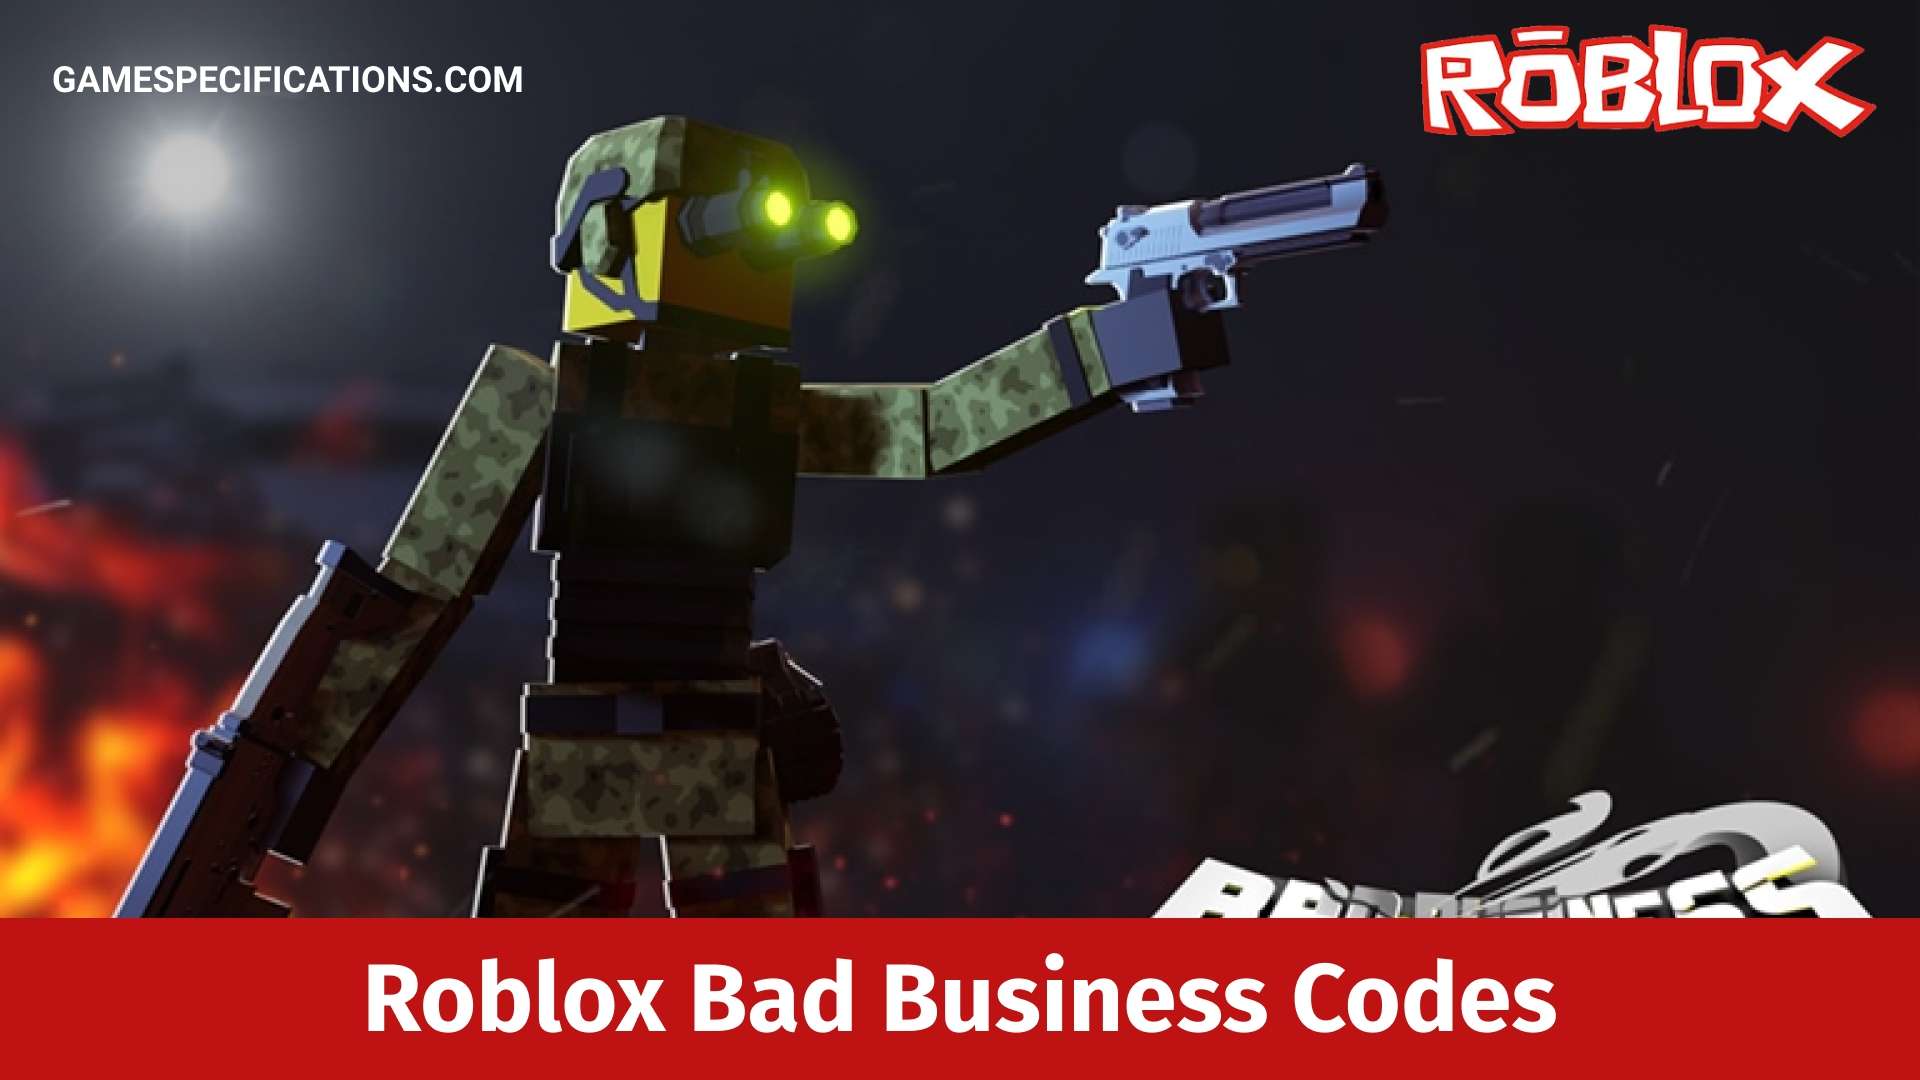 Roblox Bad Business Codes July 2021 Game Specifications - games like overwatch in roblox